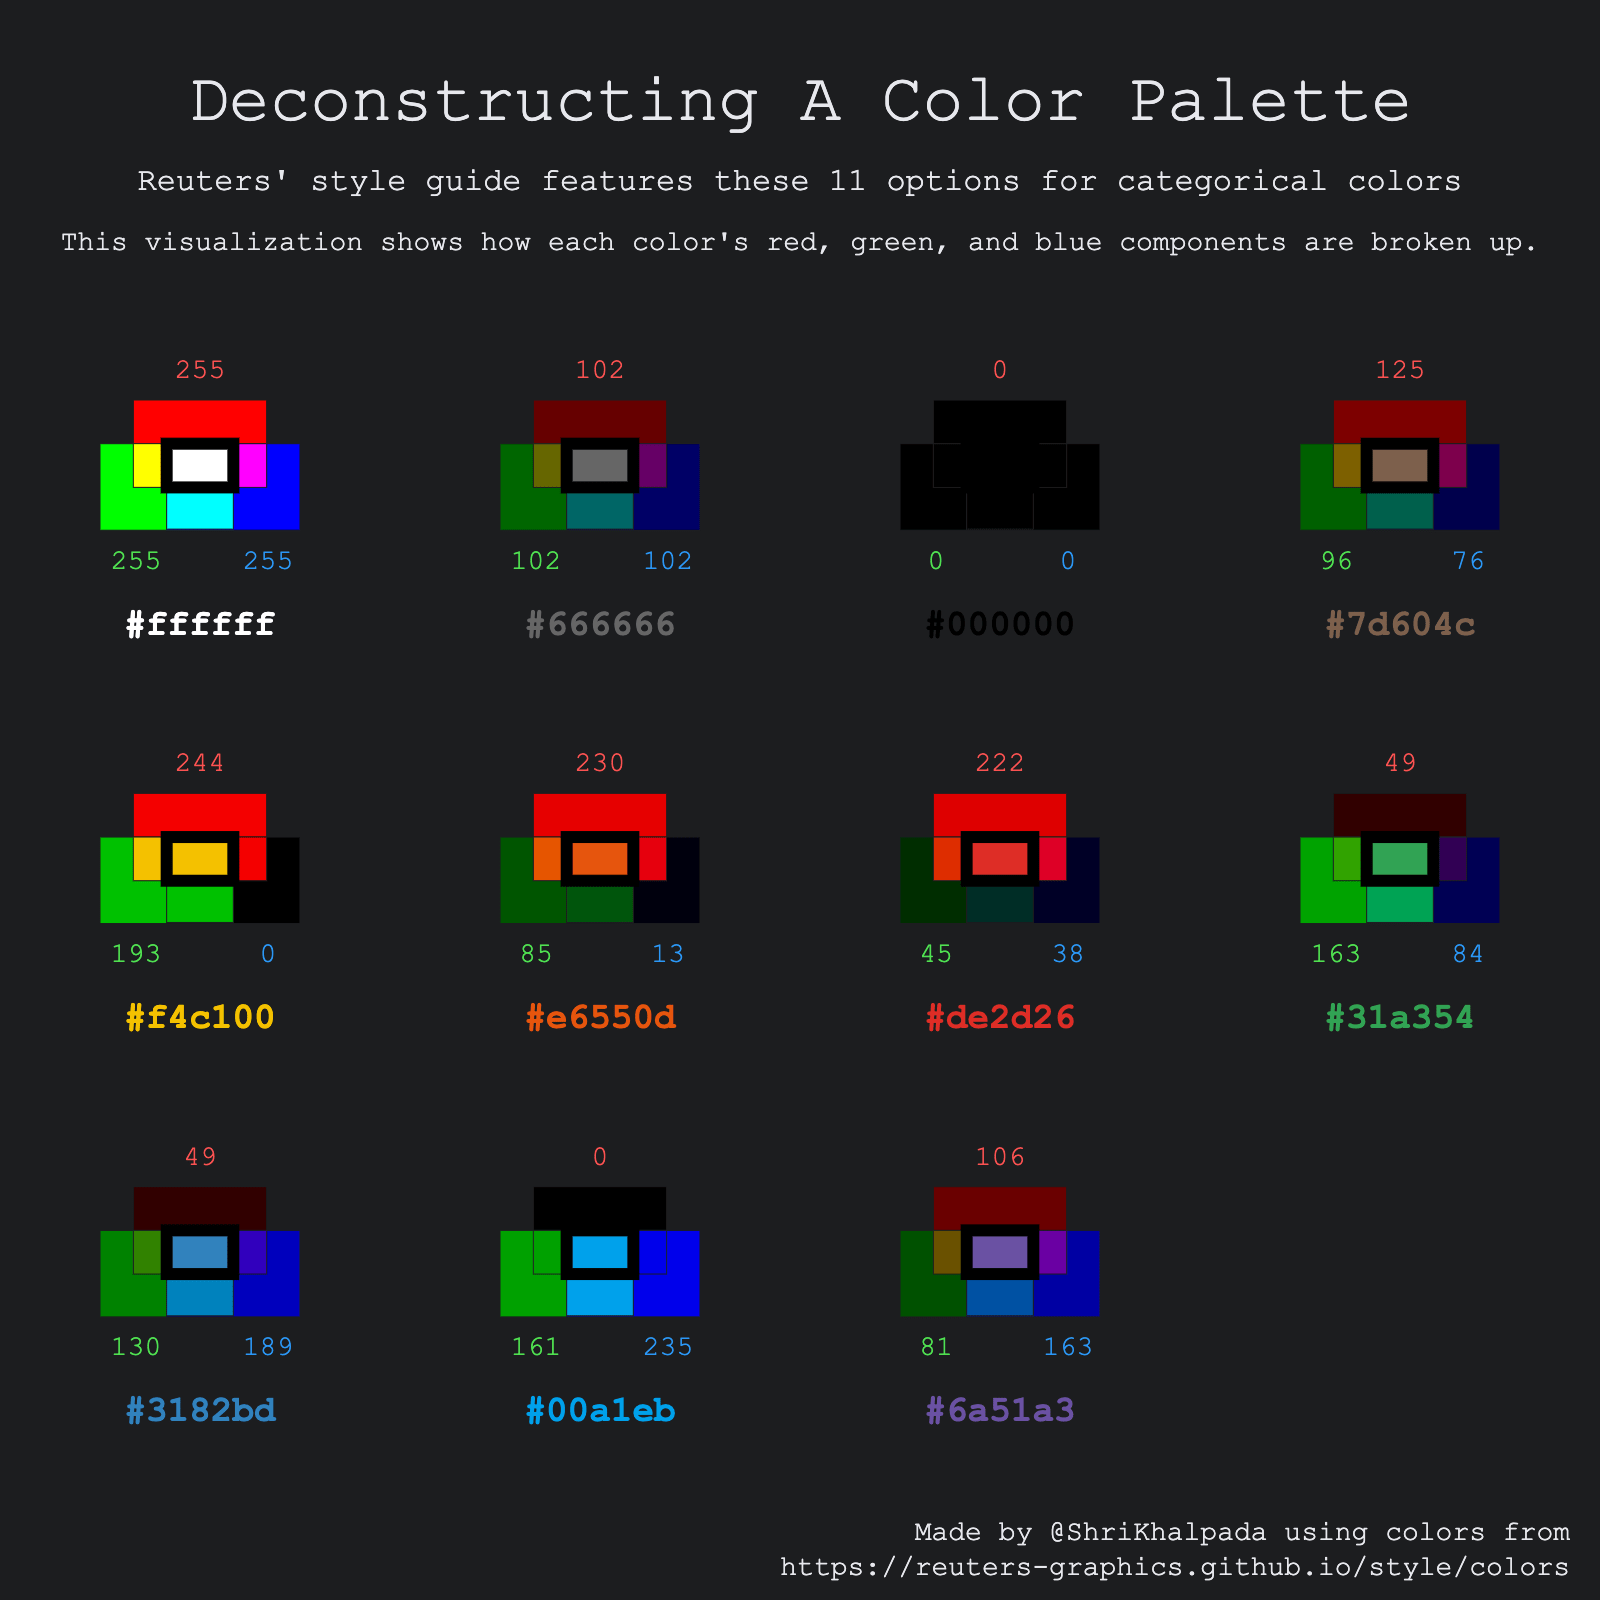 A color block diagram titled "Deconstructing A Color Palette" showing the breakdown of red, green, and blue components for each color in Reuters' style guide.